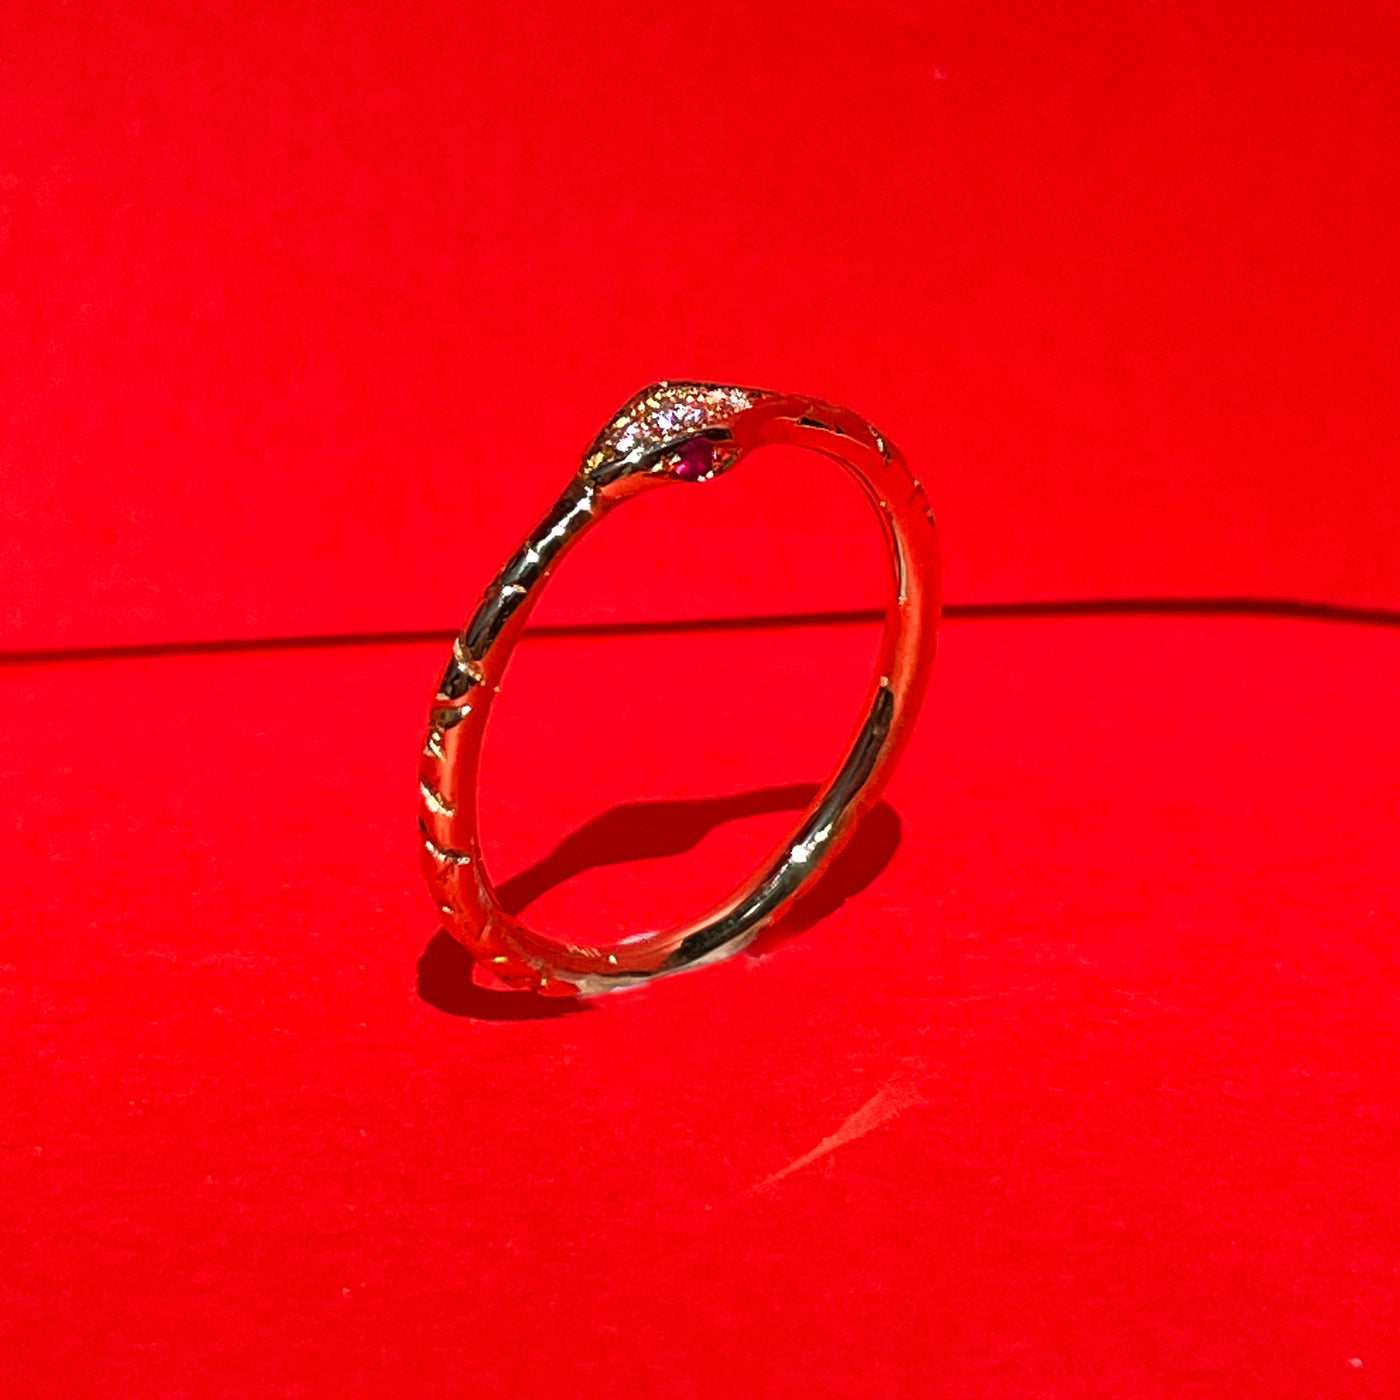 The Ultimate Ouroboros Snake Ring